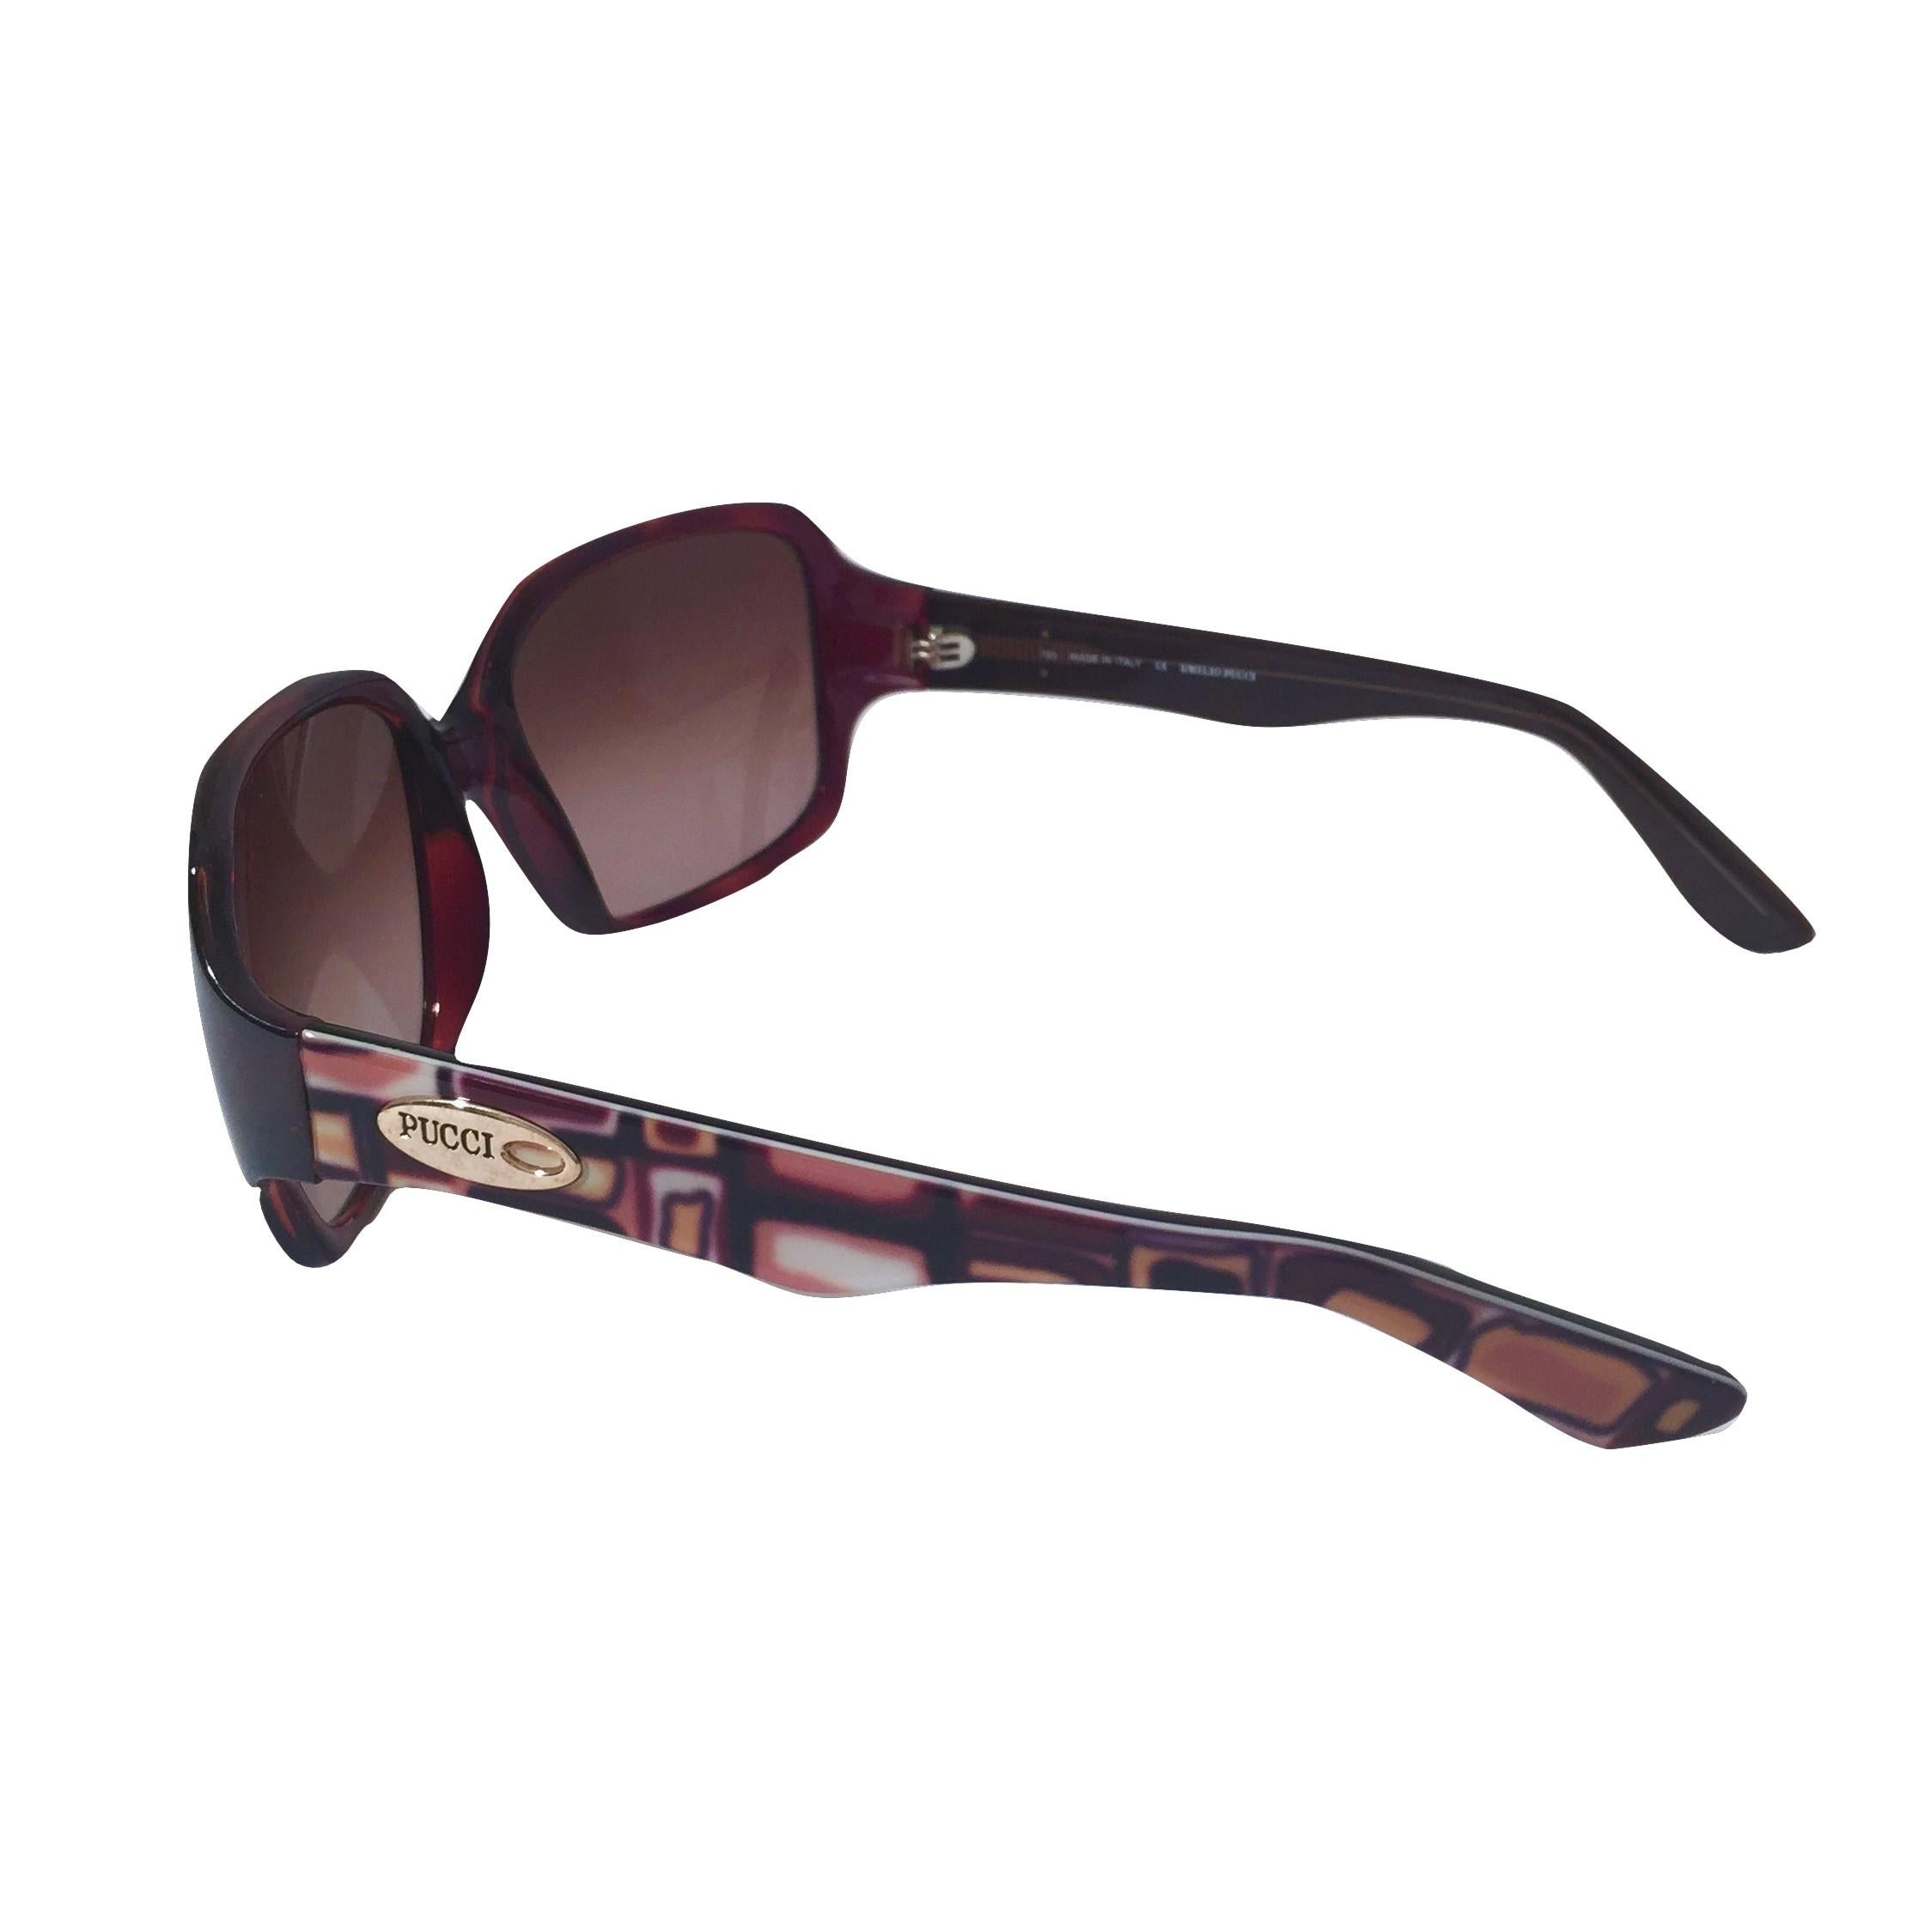 Emilio Pucci Sunglasses
Brand New
* Stunning Classic Pucci Sunglasses
* Classic Auburn Brown Frames
* Pucci Print Arms:
* Peach, White, Yellow & Auburn
* Gold Pucci Logo on Both Sides
* Handmade ZYL in Italy
* 100% UV Protection
* Comes with Case,